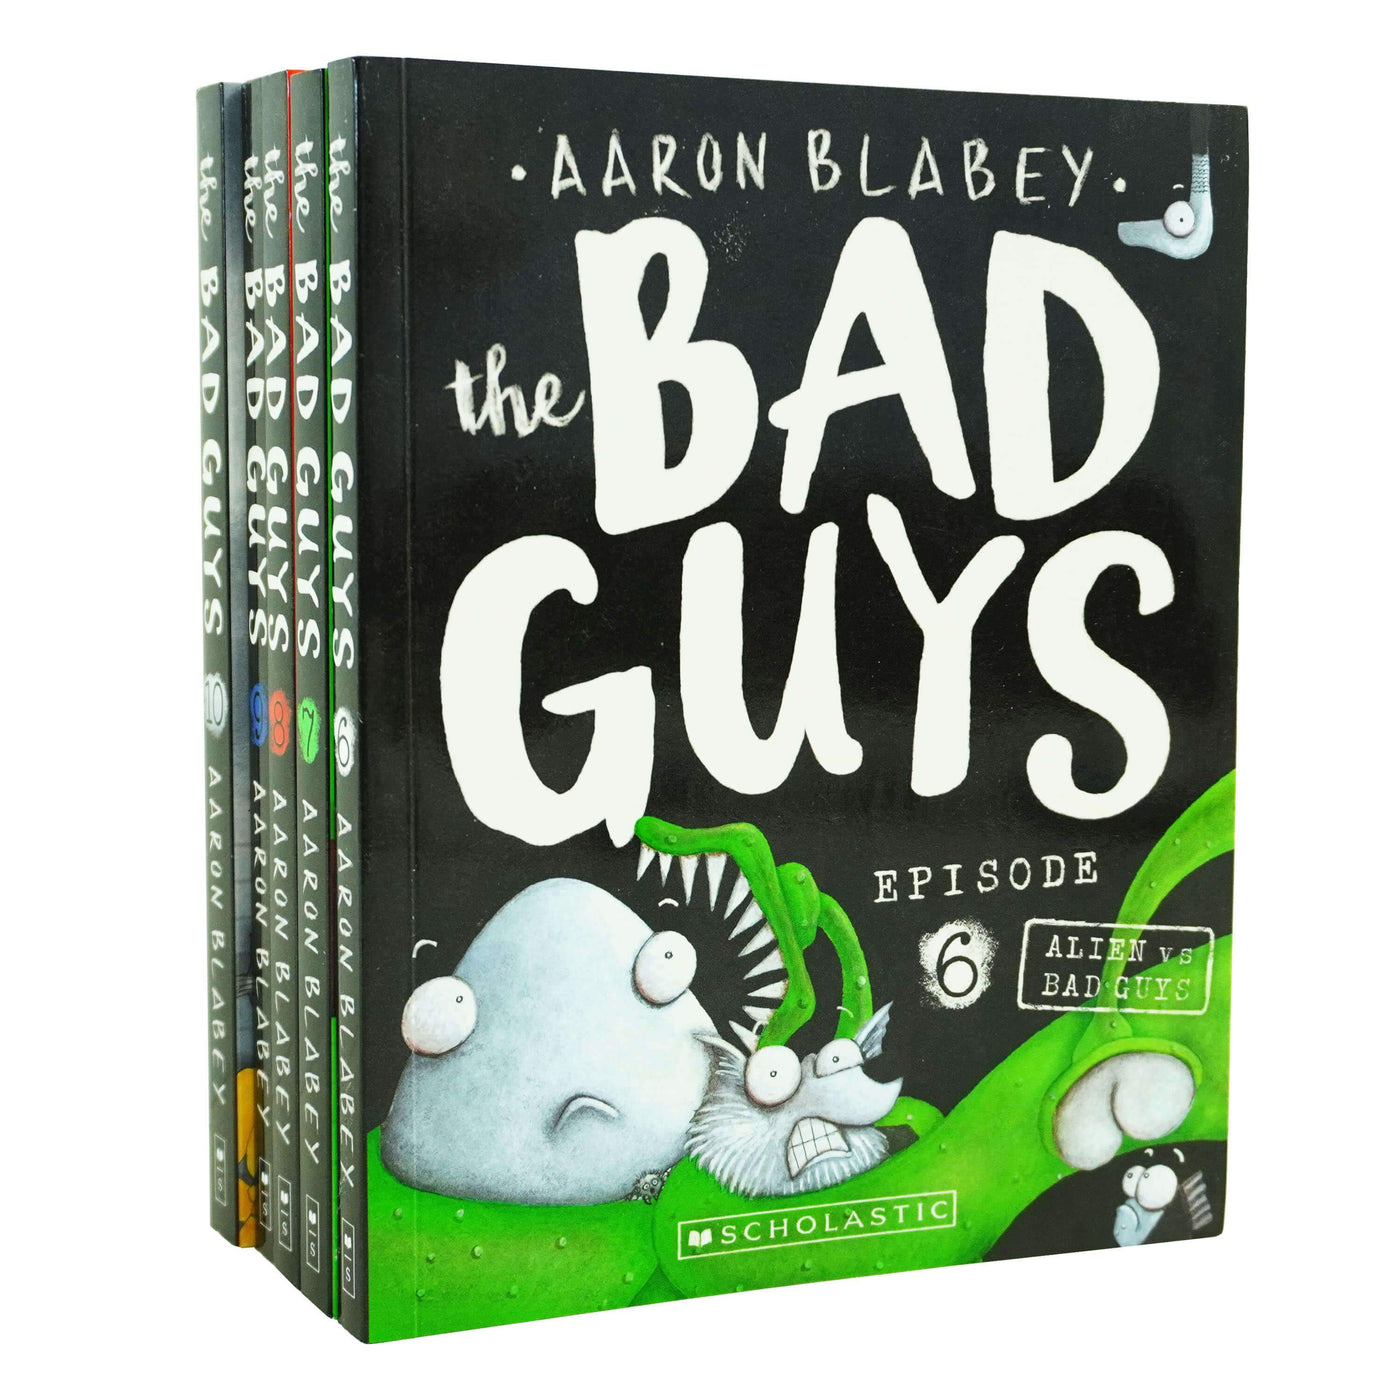 all of the bad guys books